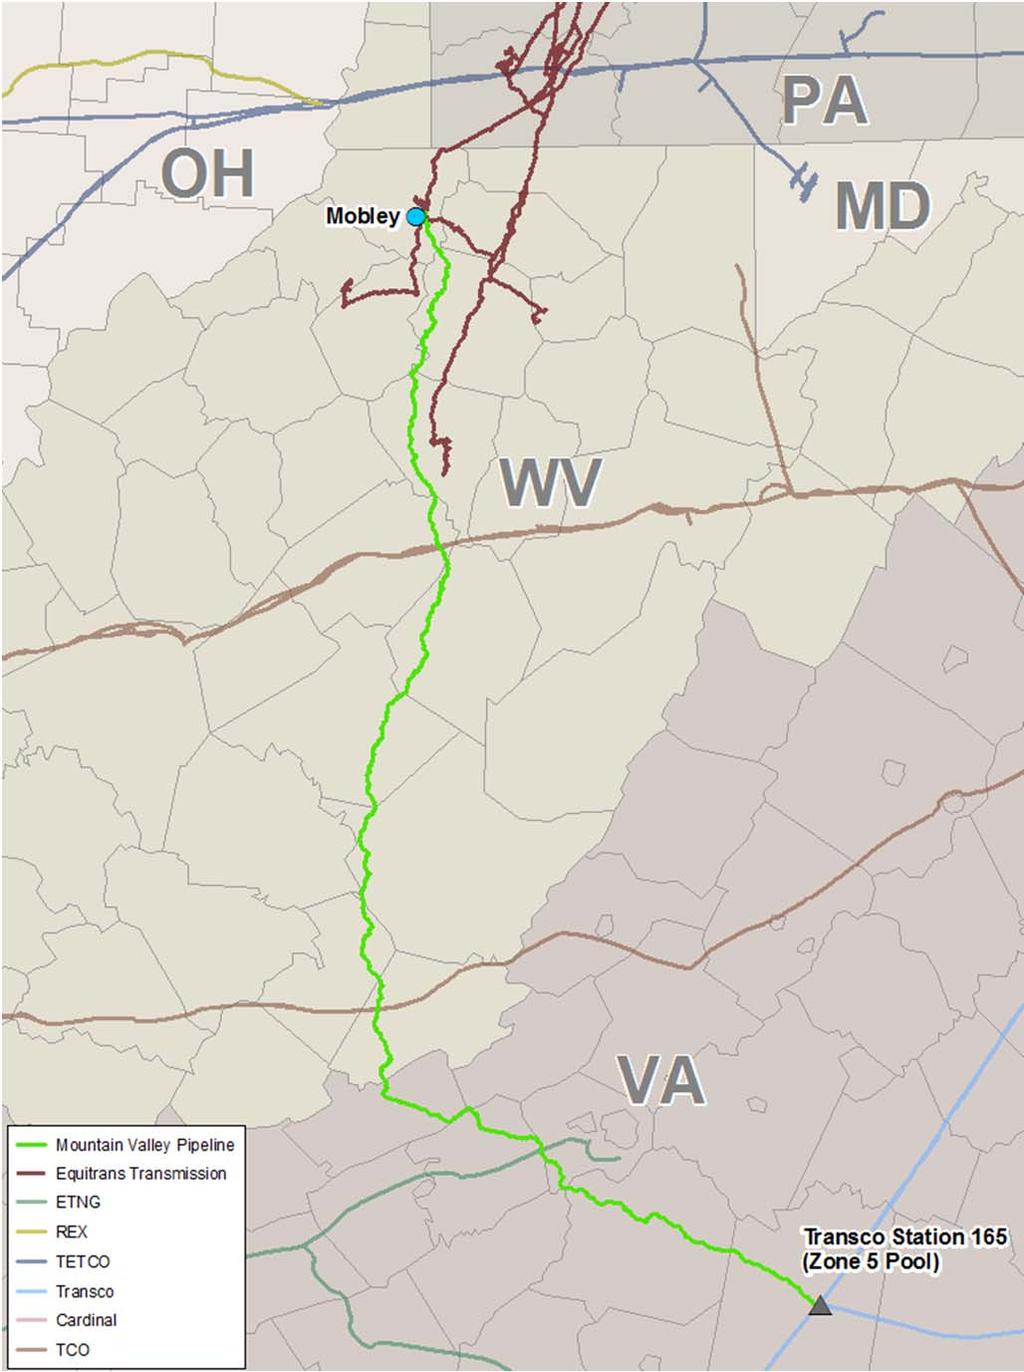 14 Growth Strategy Extend Pipeline Network Mountain Valley Pipeline Overview Pipeline to growing natural gas demand market in southeast US 300-mile FERC-regulated pipeline 42 pipe diameter ~$3.0B-$3.